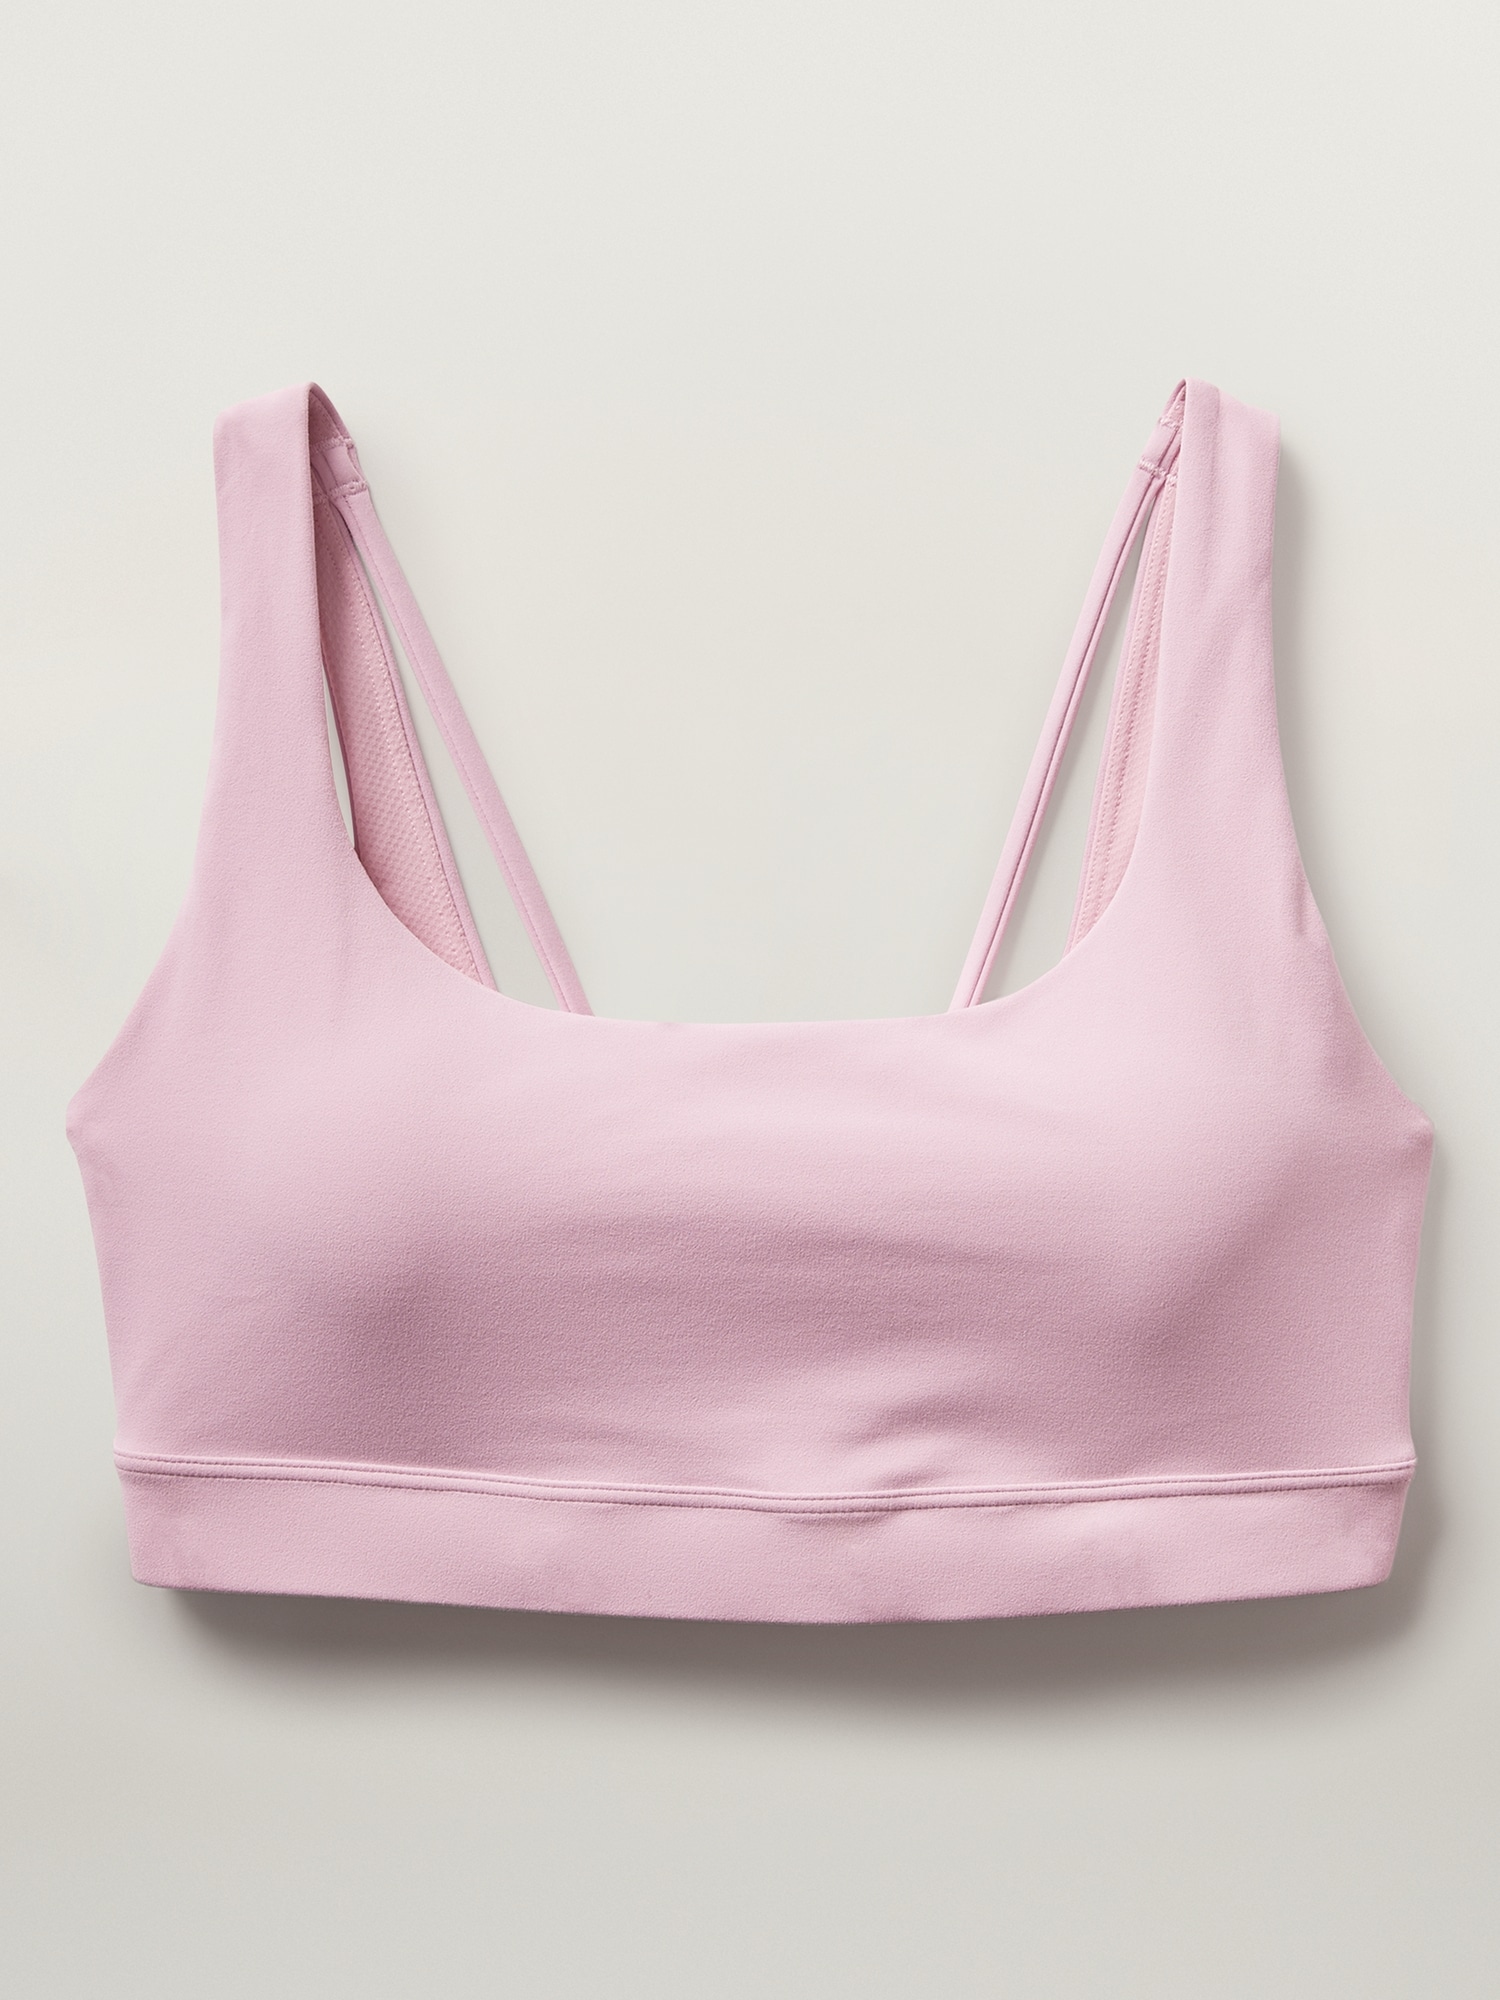 I Am 14 And Still Wear A Training Bra Or Exercise A Cup Bra, 44% OFF